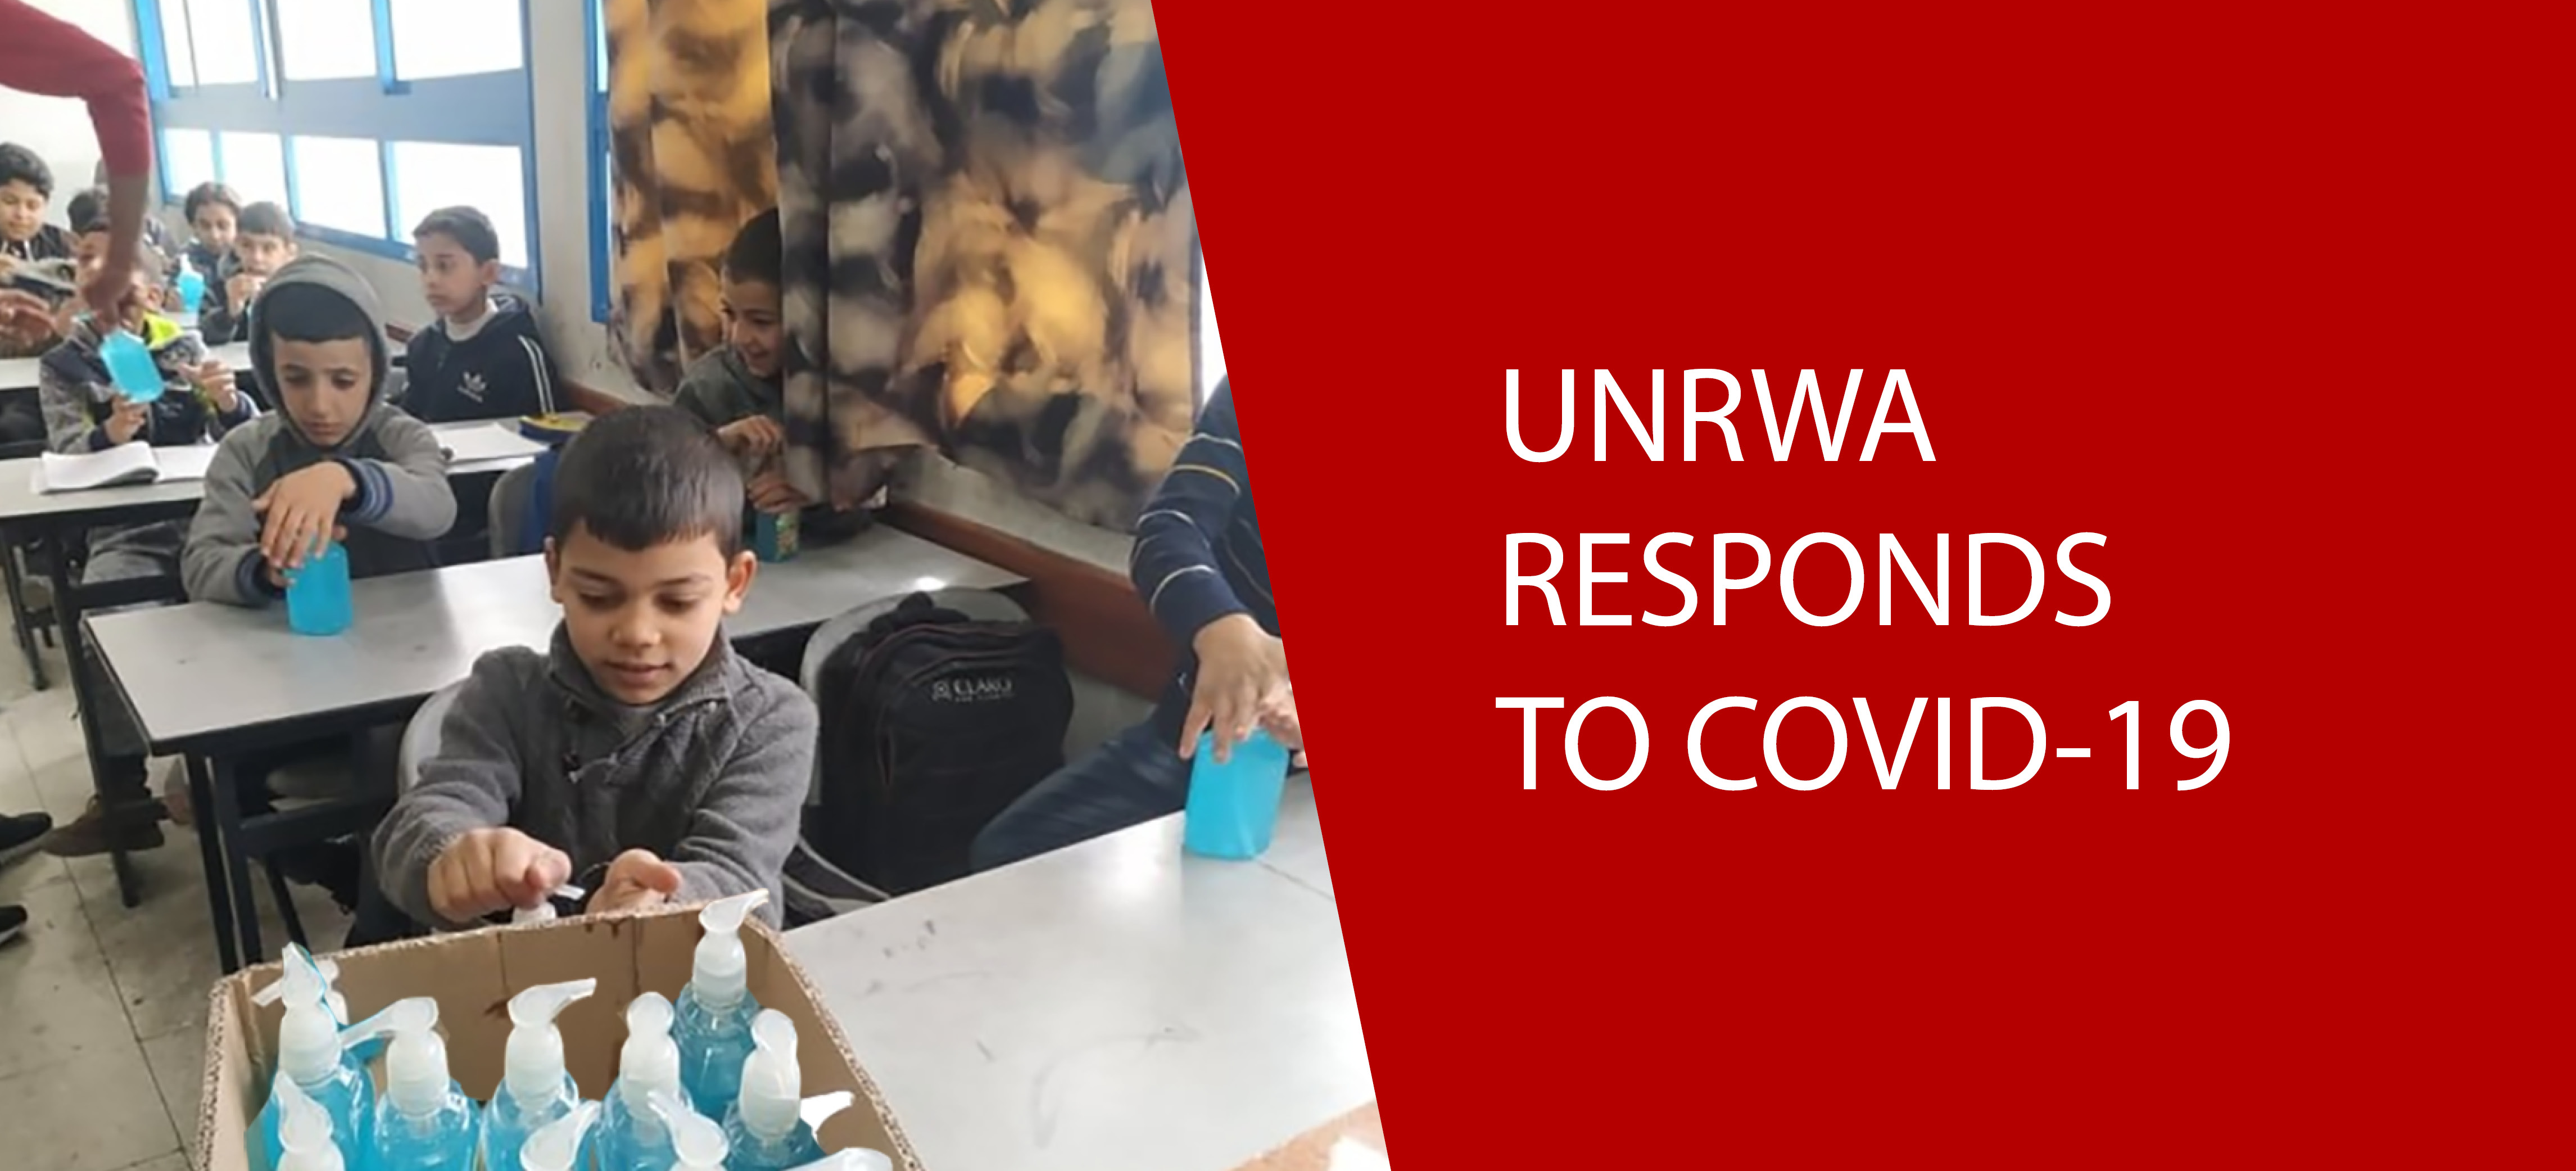 Palestine Refugee Agency Adopts Emergency Plan to Respond to COVID-19 Outbreaks